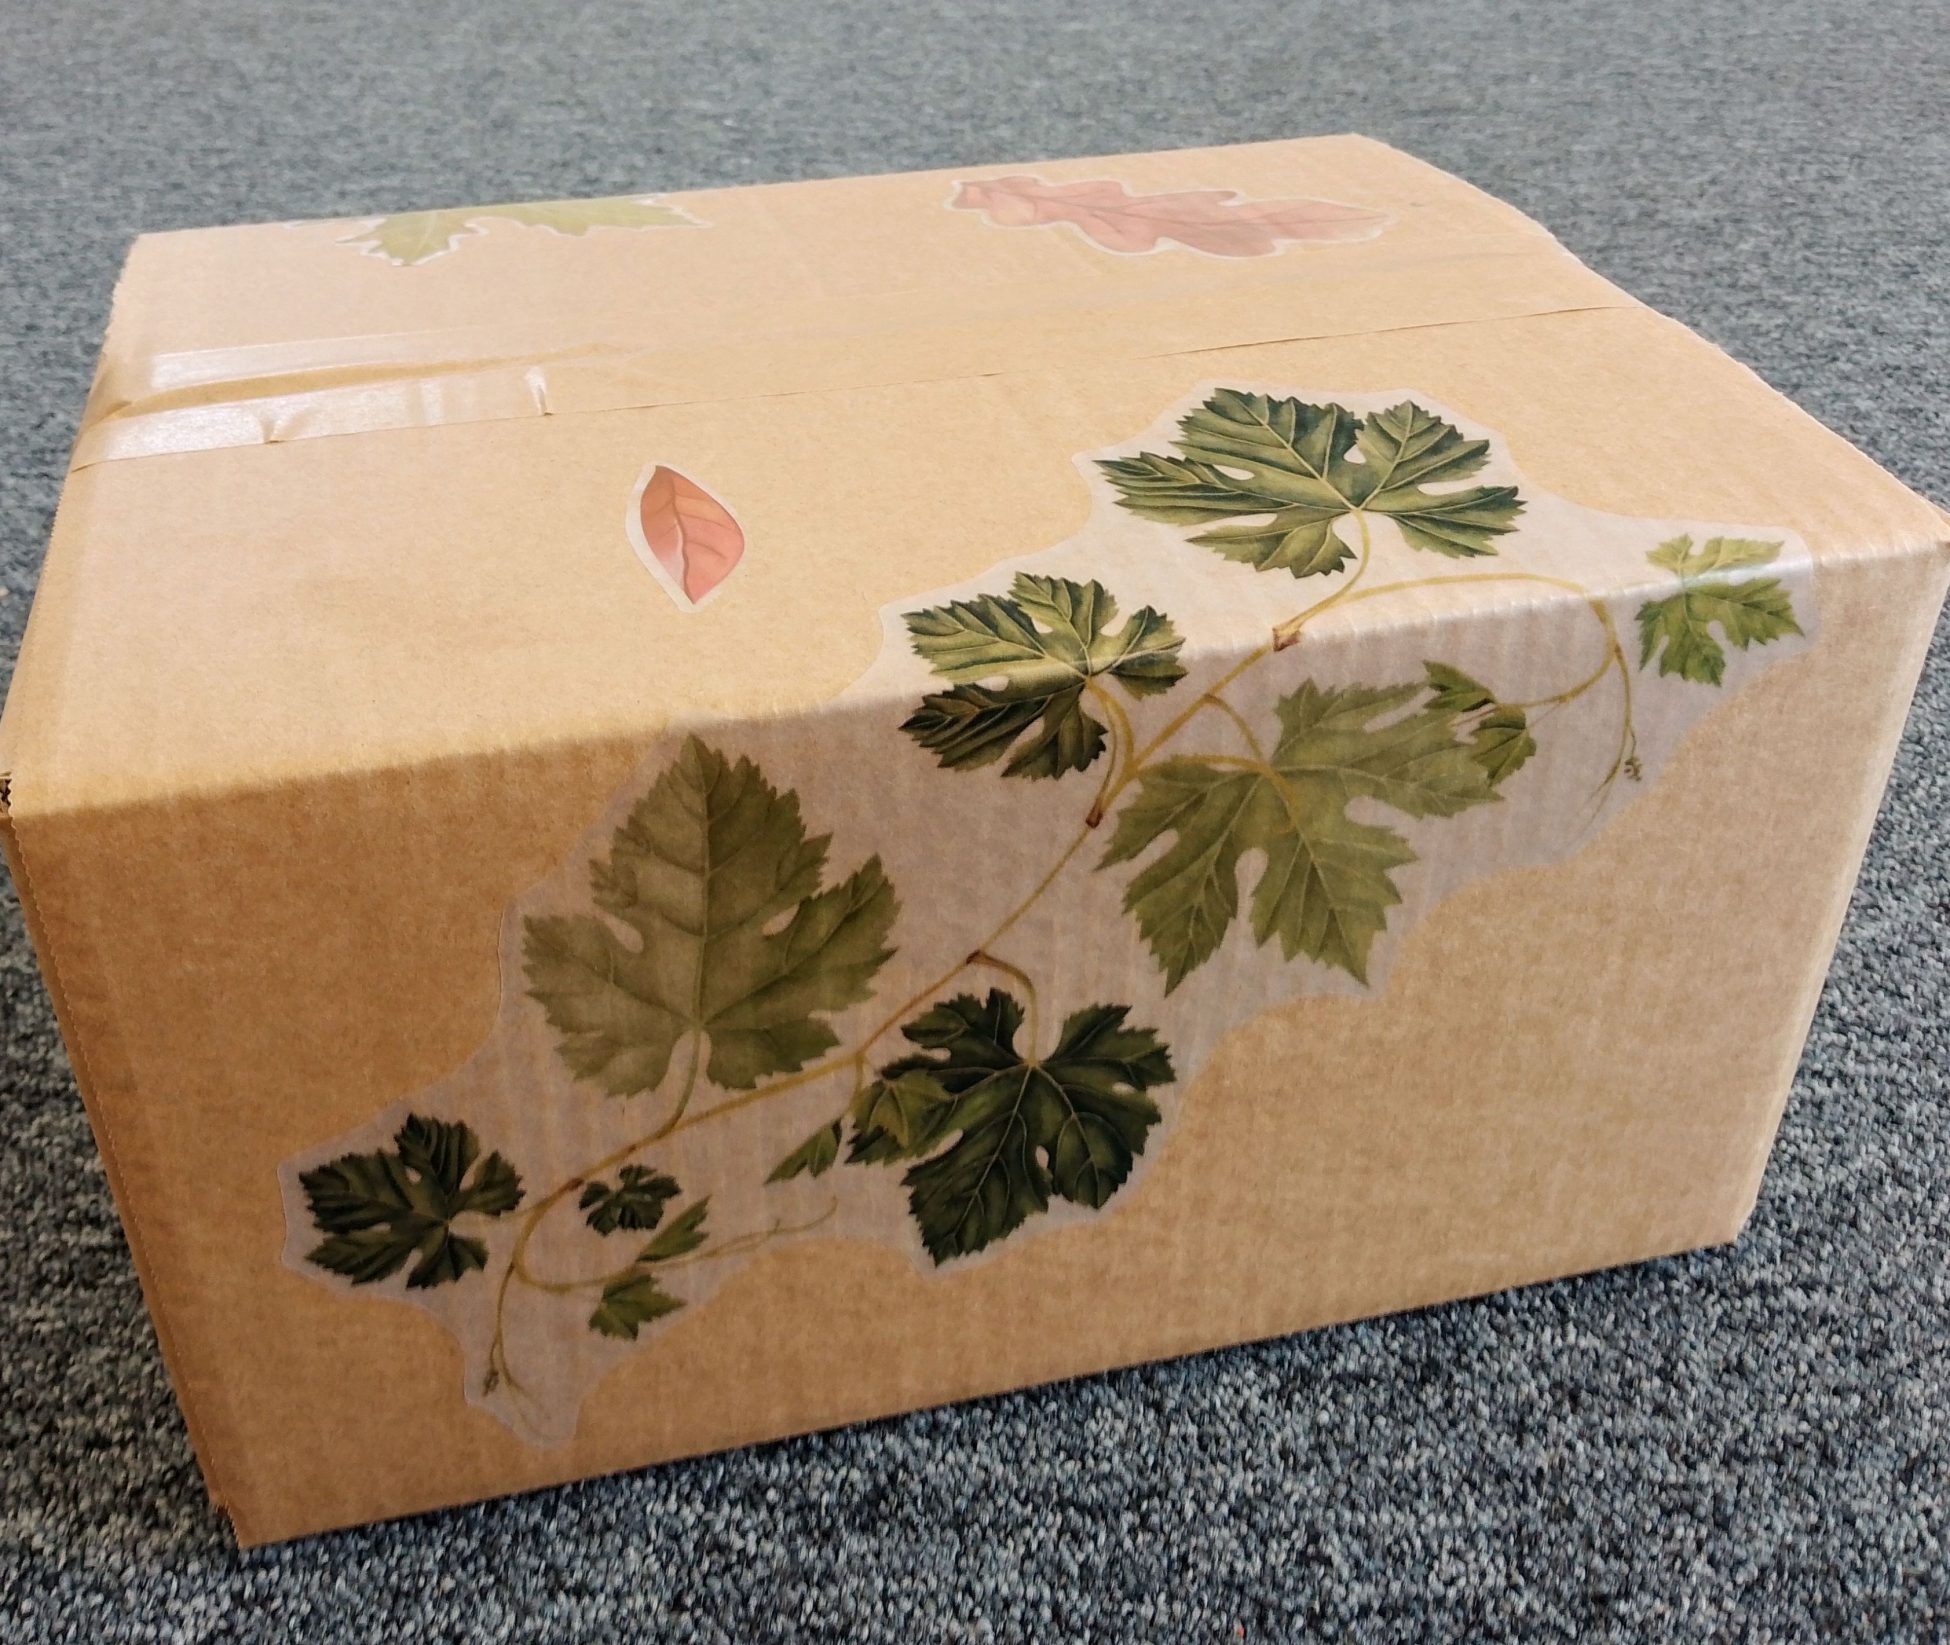 A photo of one of the Soft Fascination 'forest bathing' kits. A cardboard box adorned with leaf stickers.